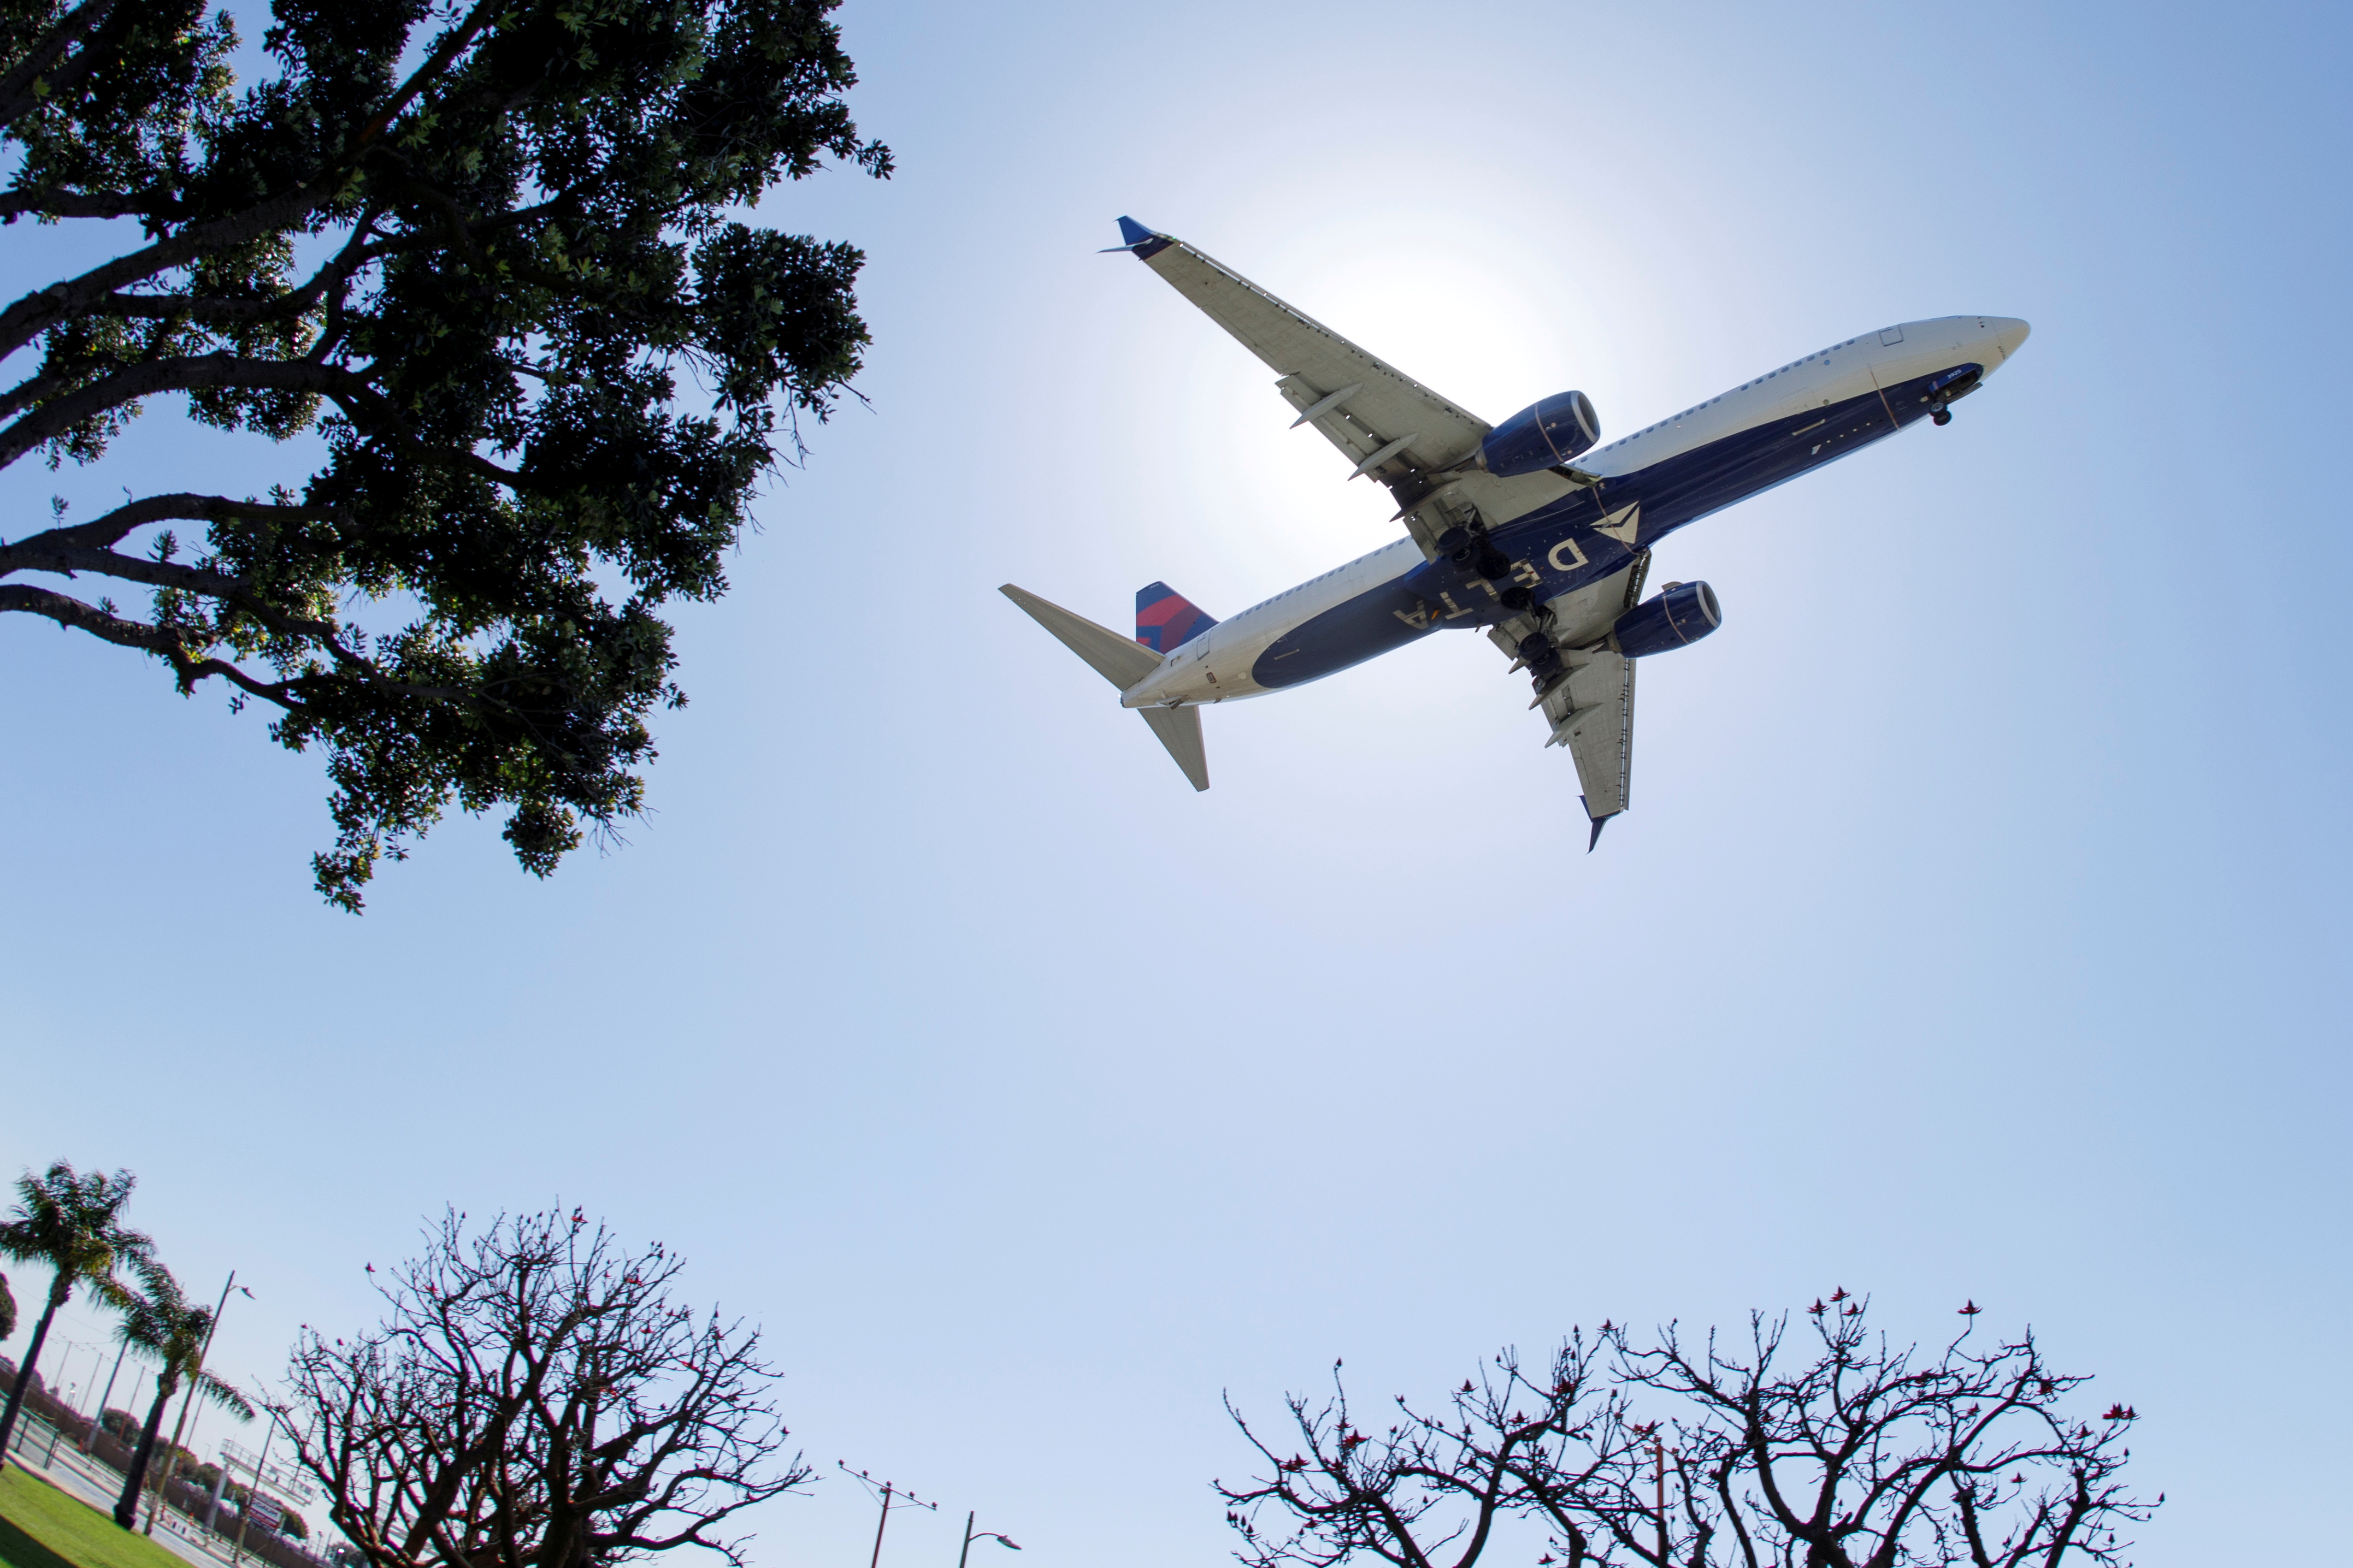 A Delta Airlines passenger jet approaches to land at LAX in Los Angeles